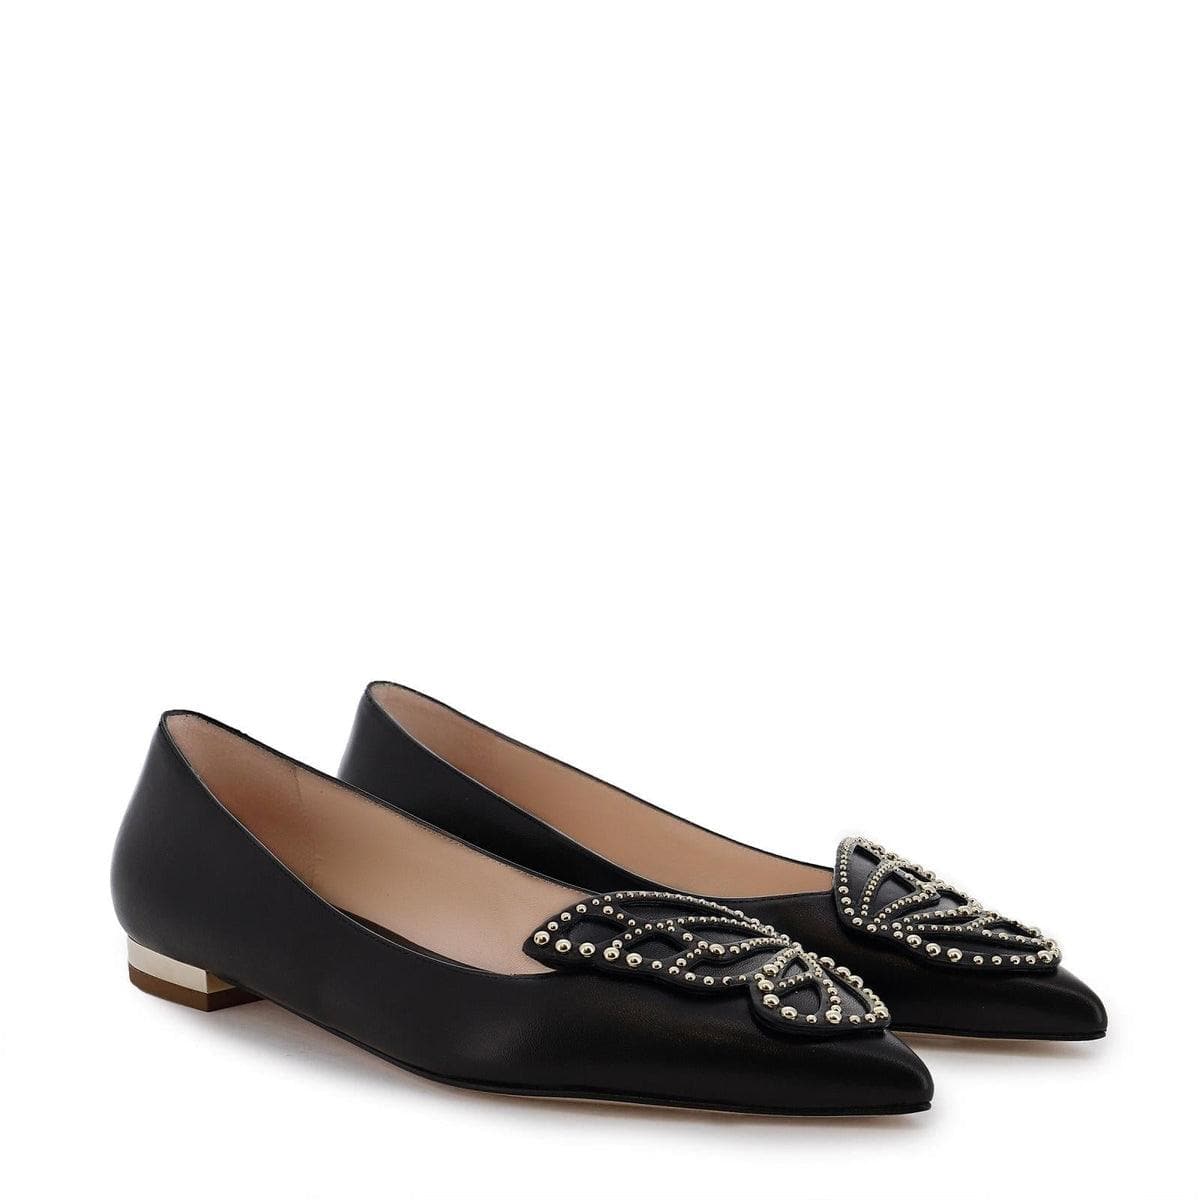 SOPHIA WEBSTER - Butterfly flat - Vittorio Citro Boutique